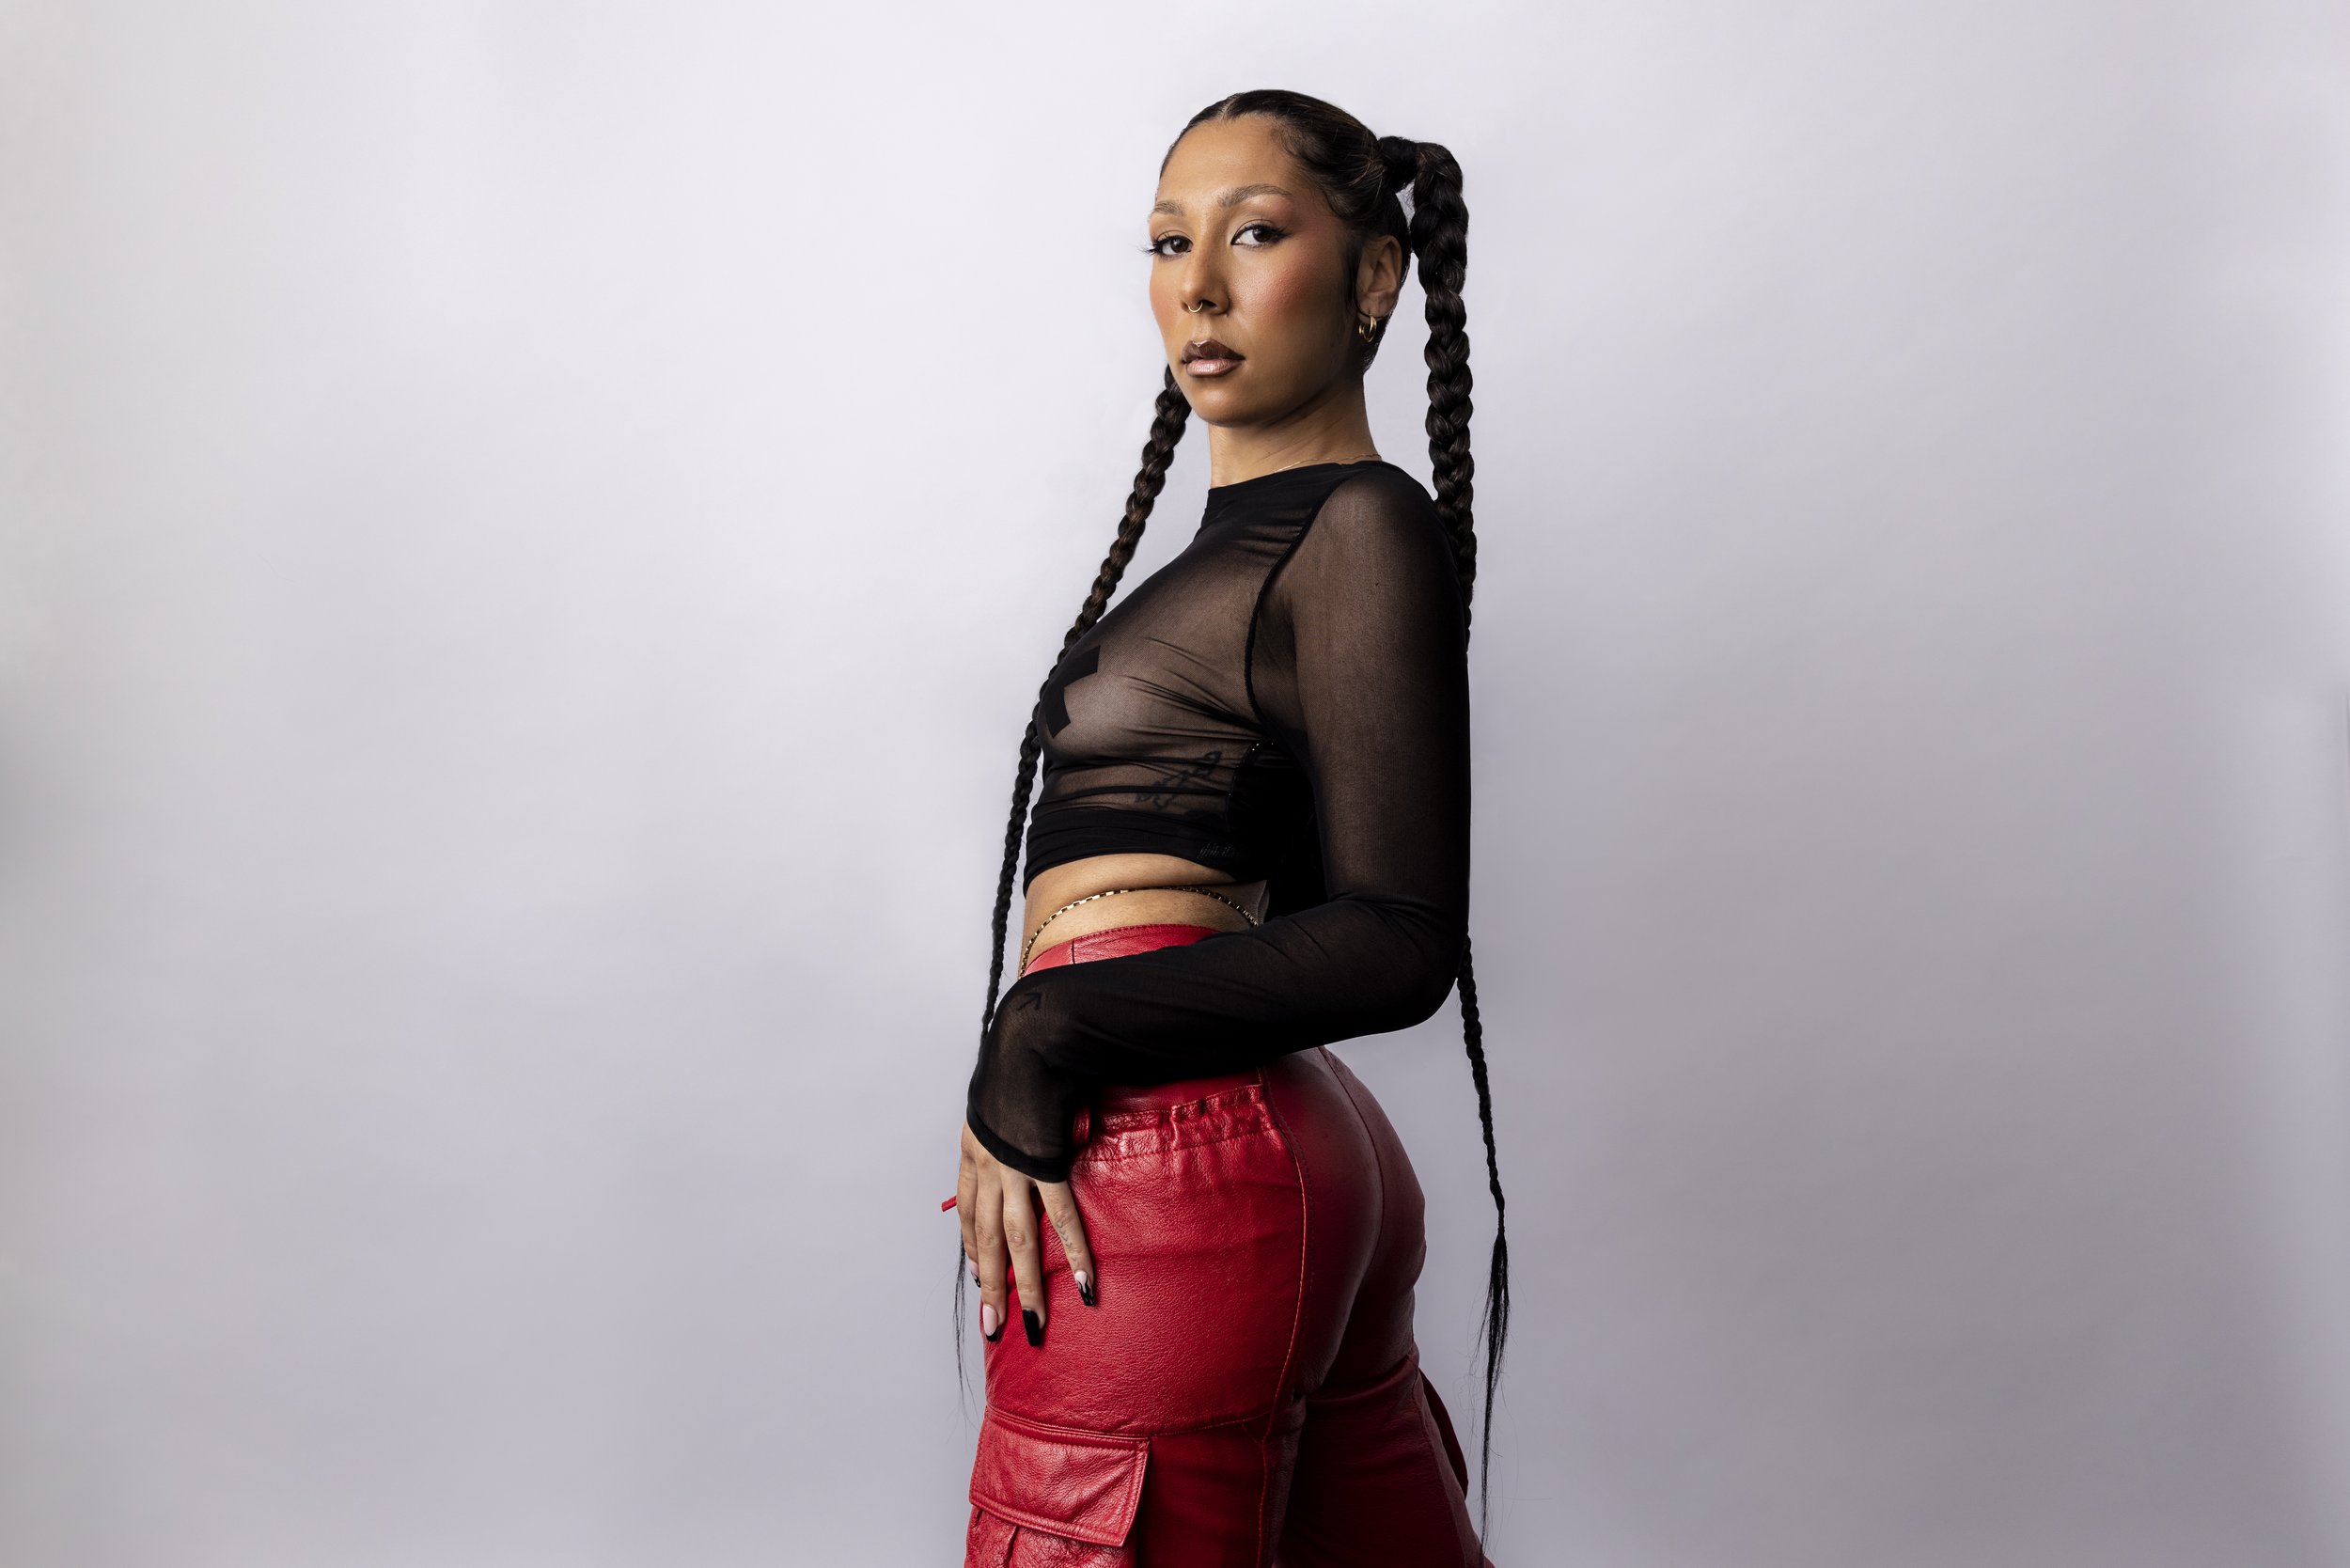 A studio photograph of the singer Miss Kaninna wearing her signature braided pigtails, wearing a long-sleeved meshed crop top and red leather trousers.